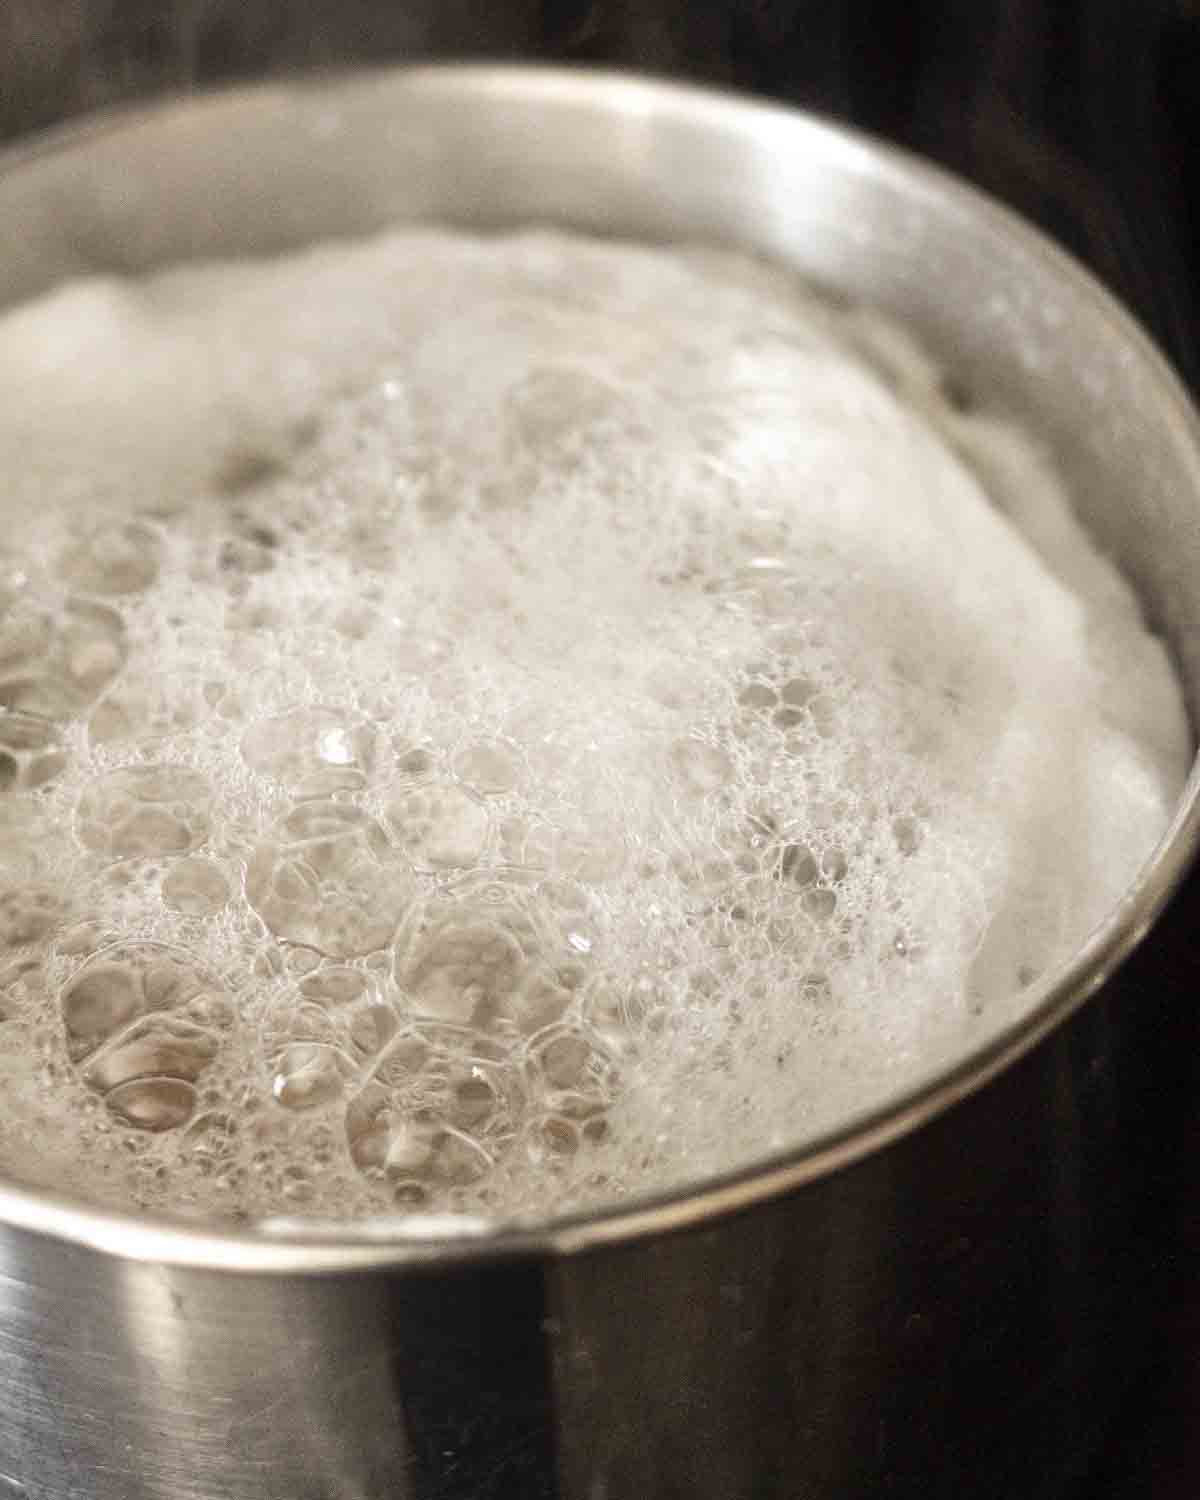 Image shows a pot of boiling chickpeas, the chickpeas are covered with a white foam that forms when chickpeas boil.